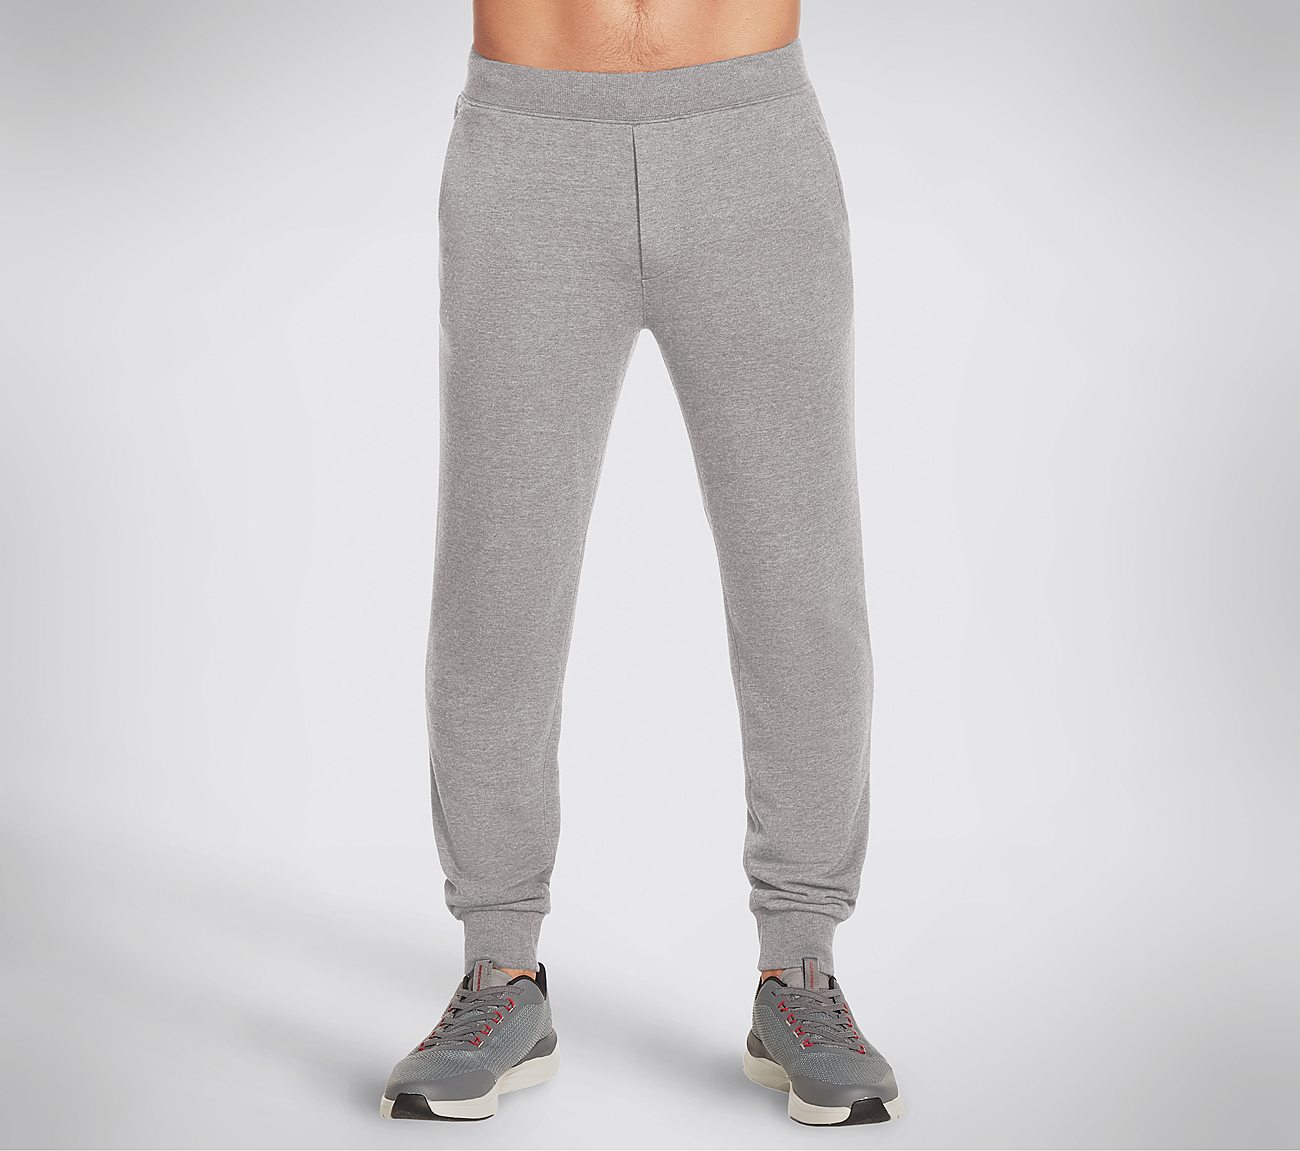 EXPEDITION JOGGER, LIGHT GREY Apparel Lateral View